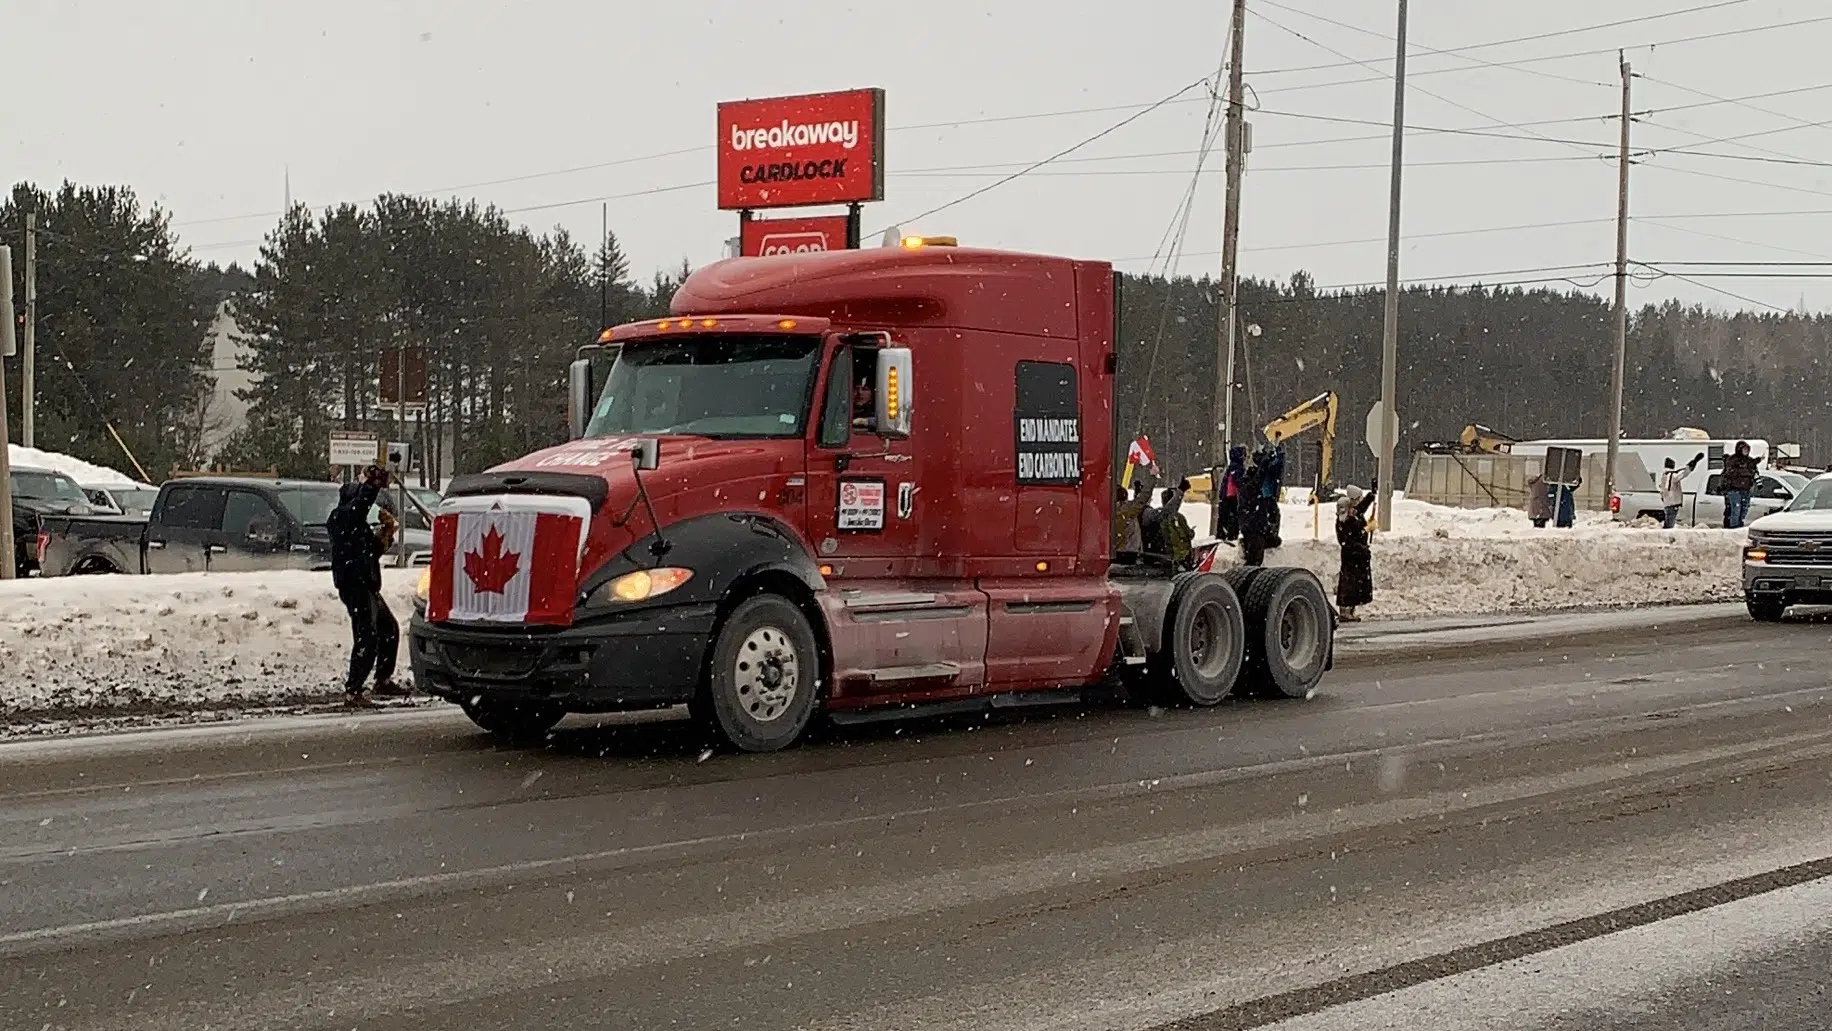 Ottawa gearing up for arrival of trucker convoy against vaccine mandates